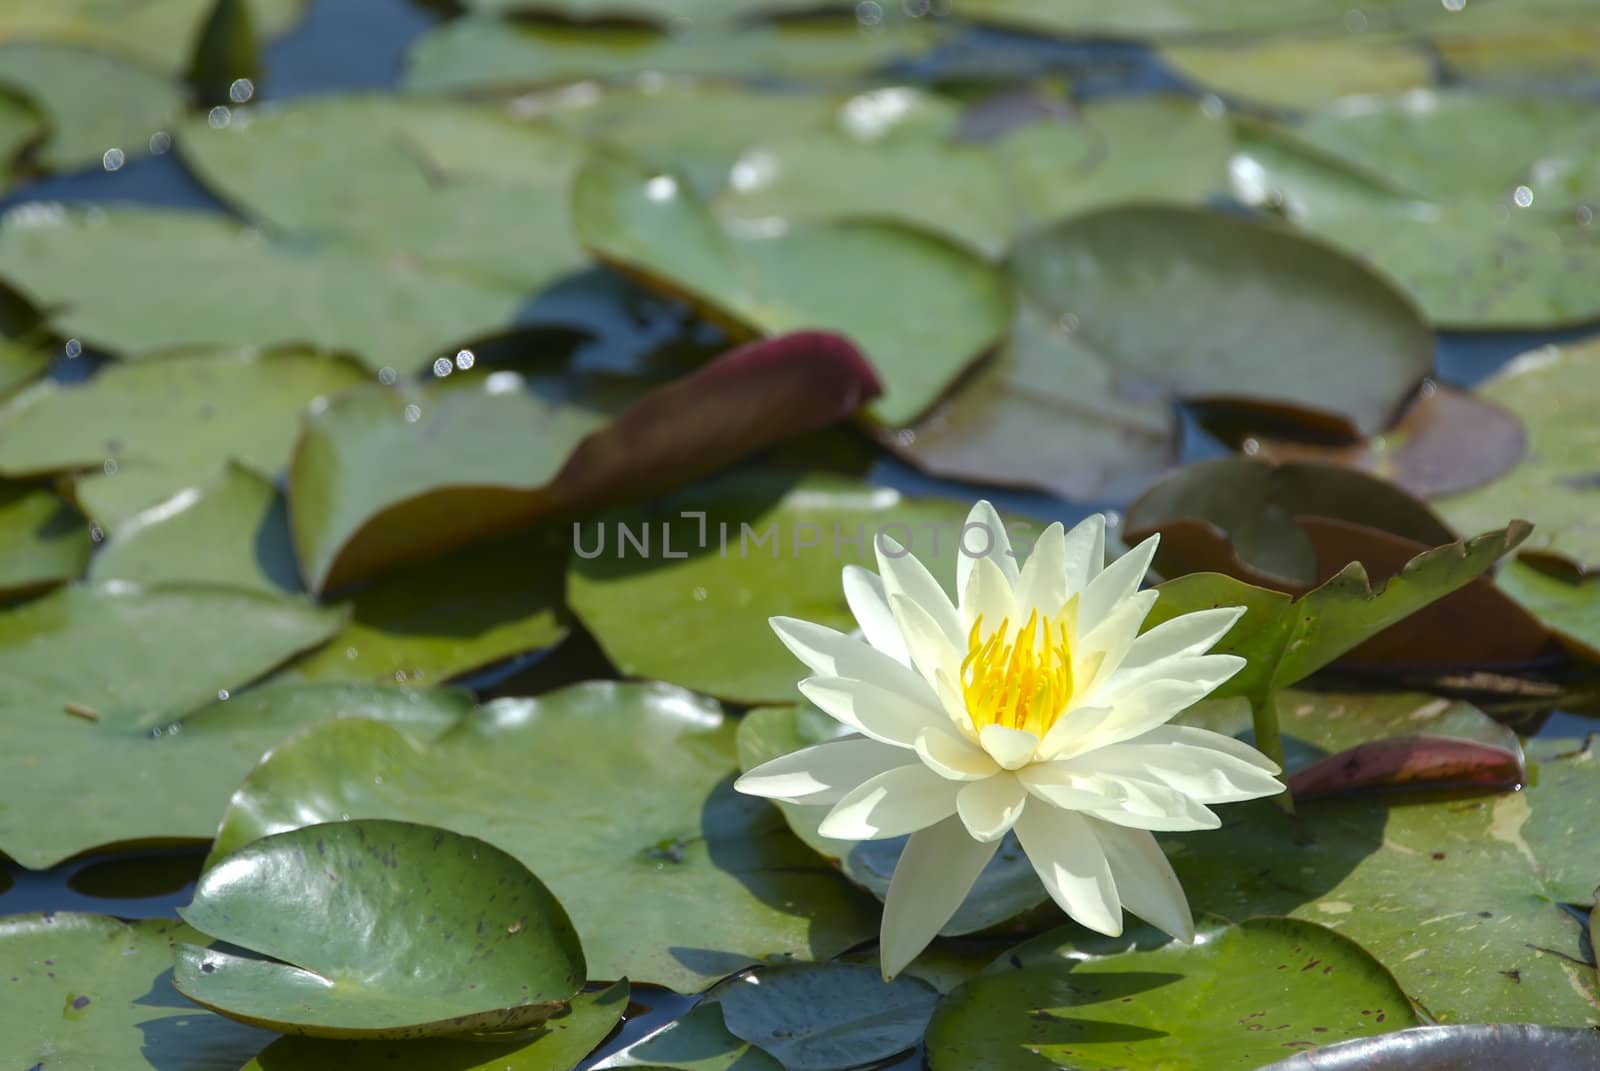 A single water lily is surrounded by a mass of green lily pads